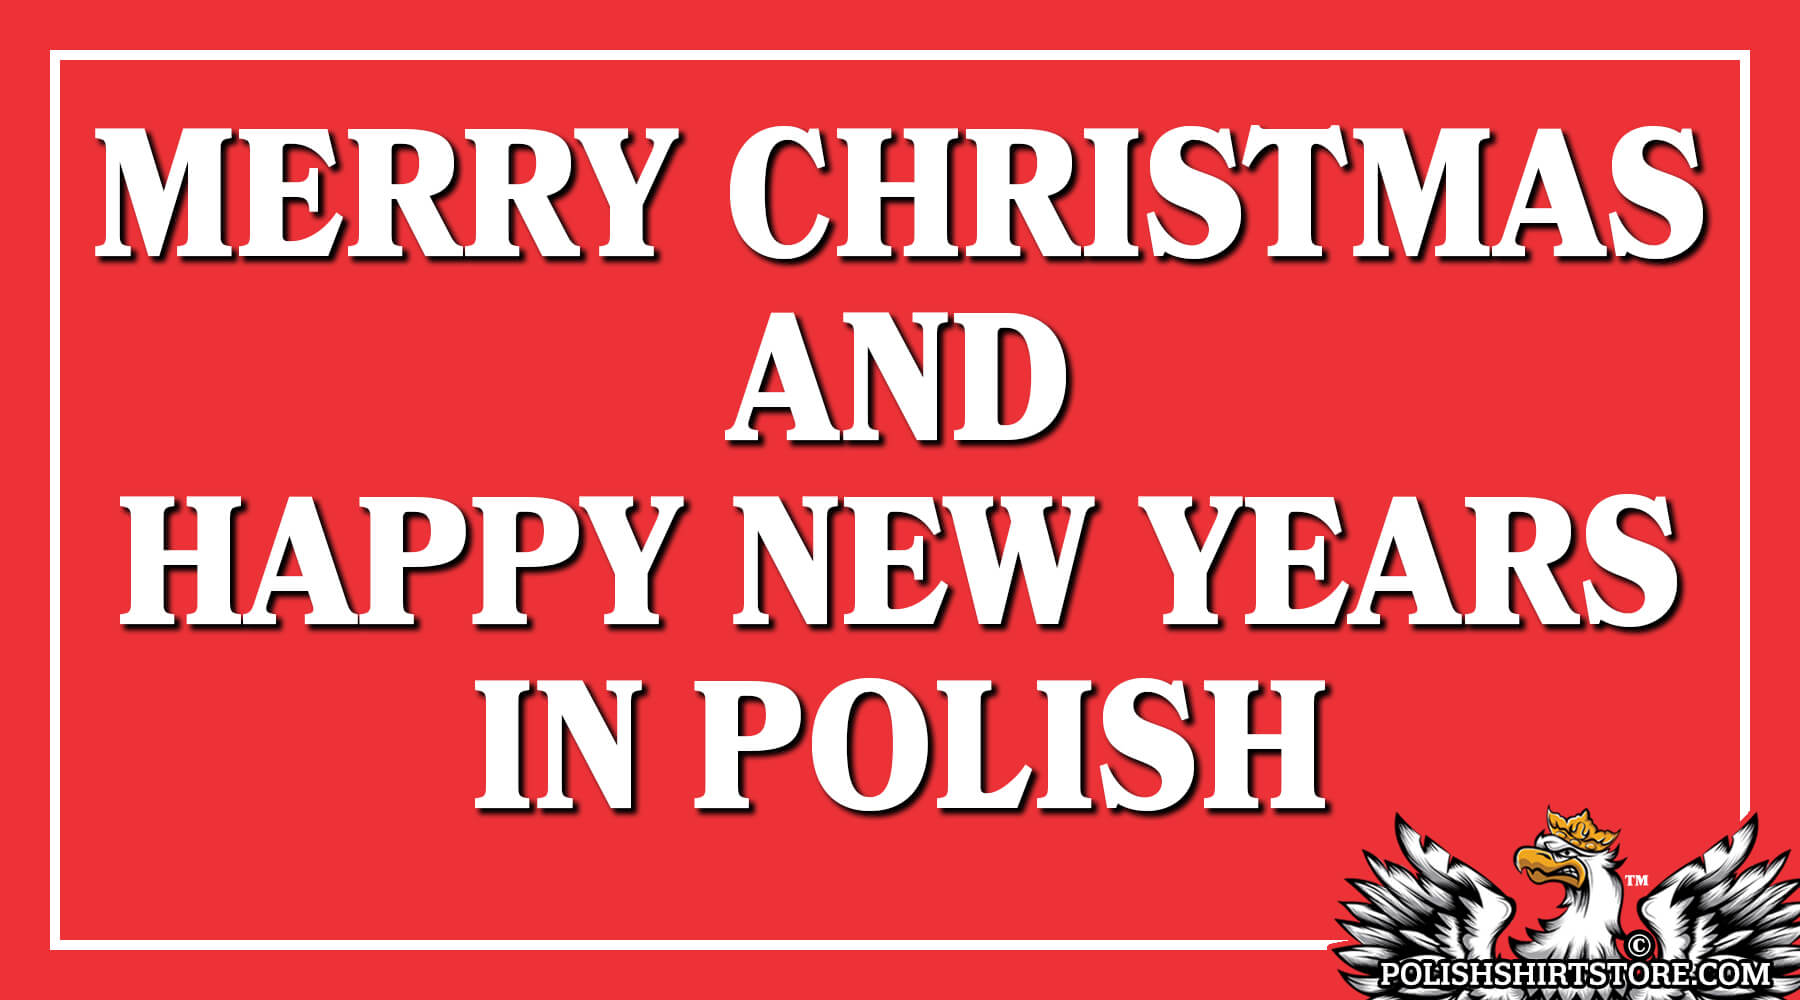 How to say Merry Christmas & Happy New Years In Polish